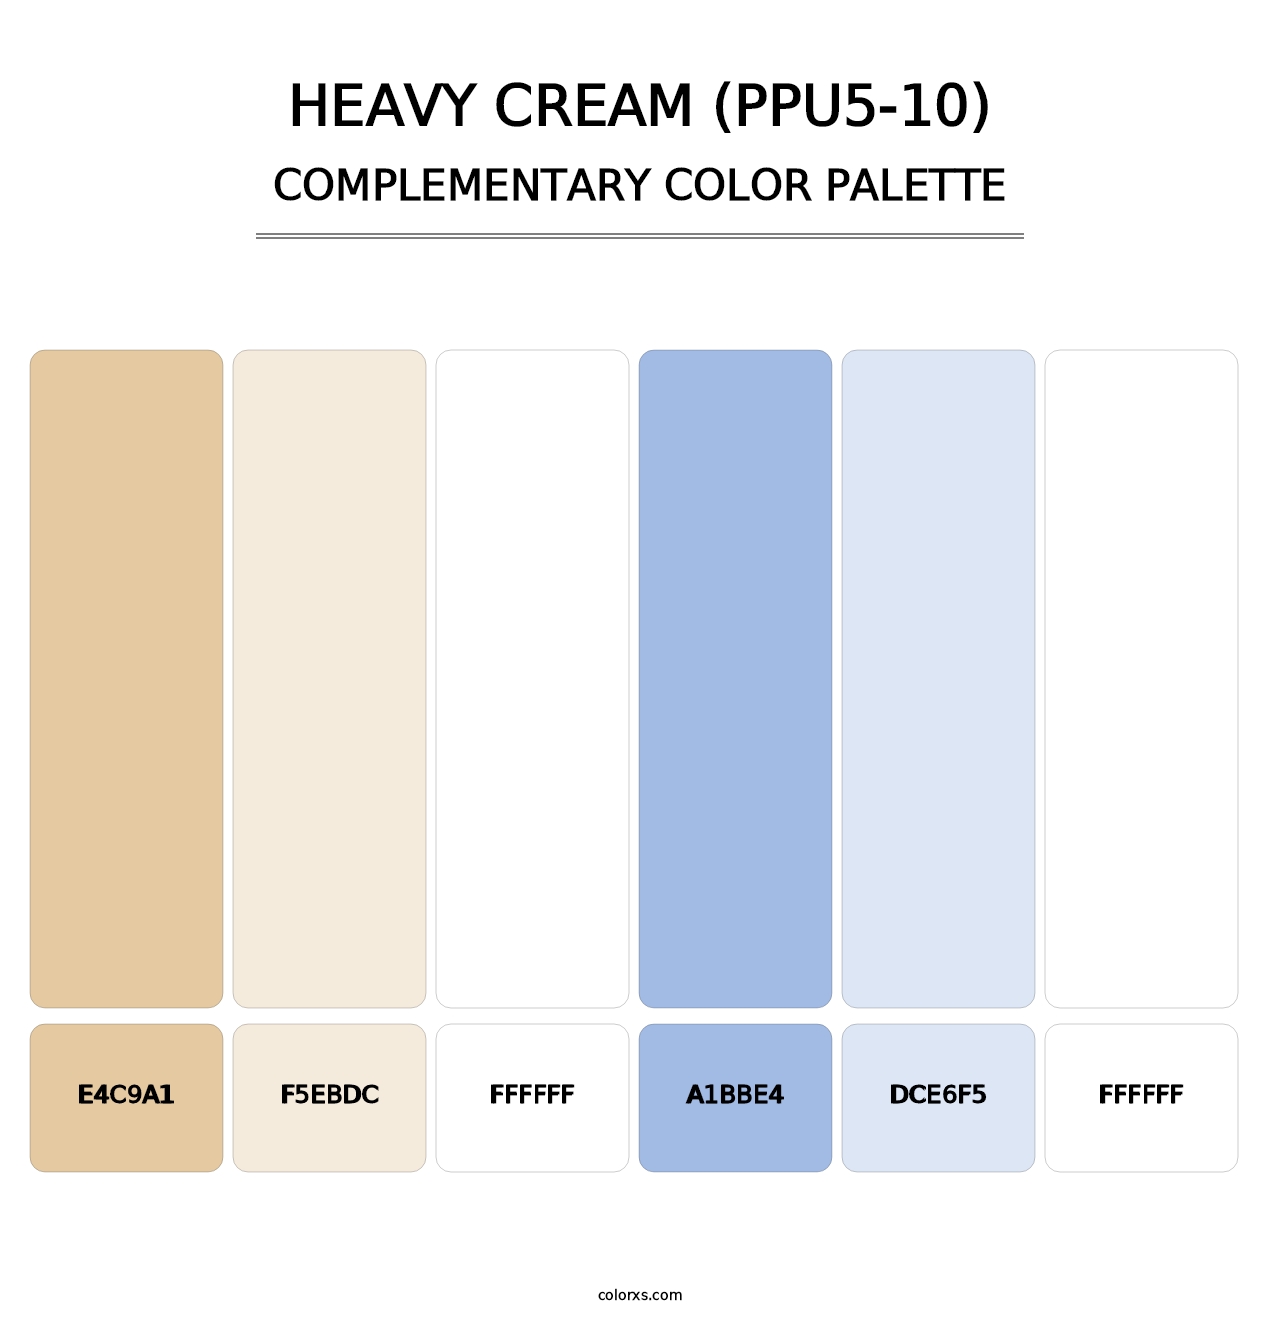 Heavy Cream (PPU5-10) - Complementary Color Palette